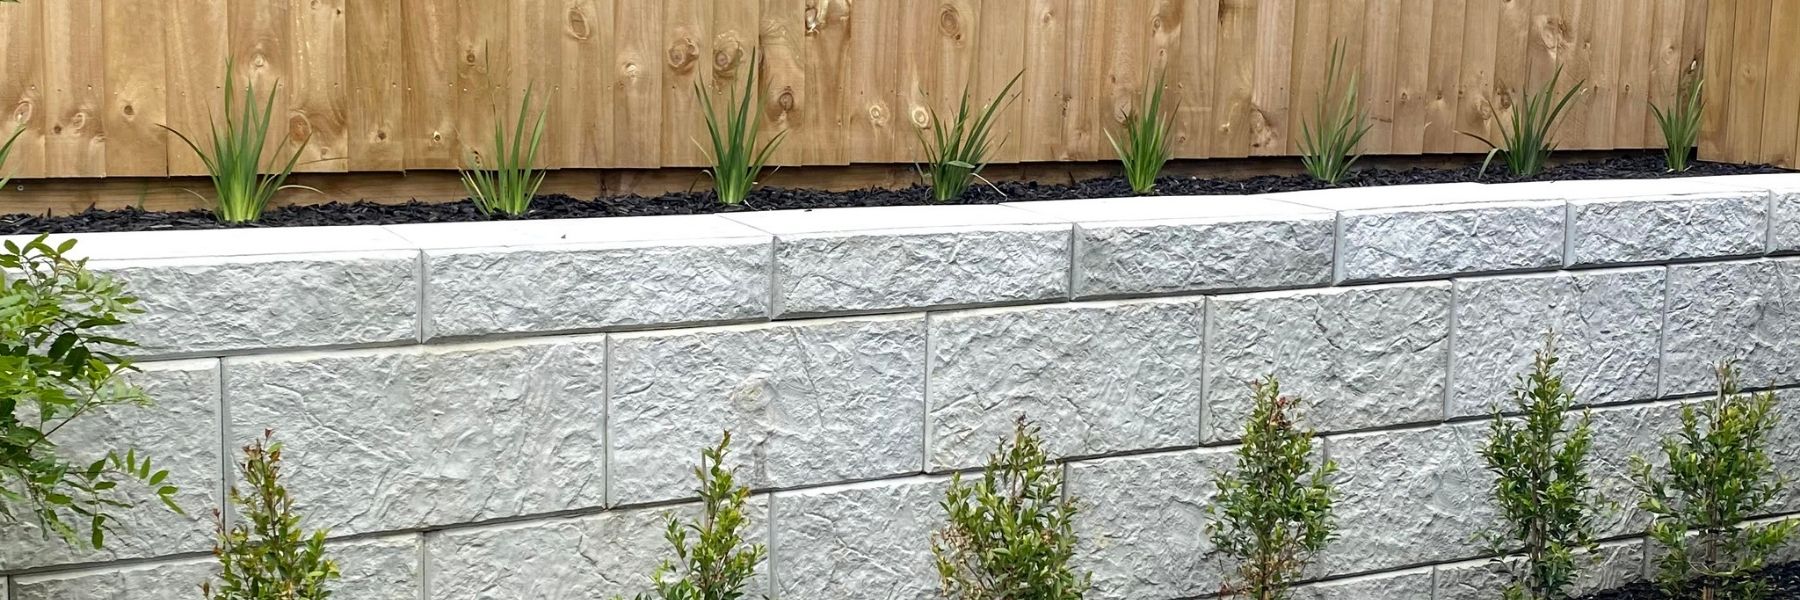 Long Stonebloc retaining wall at the back of a infill housing development